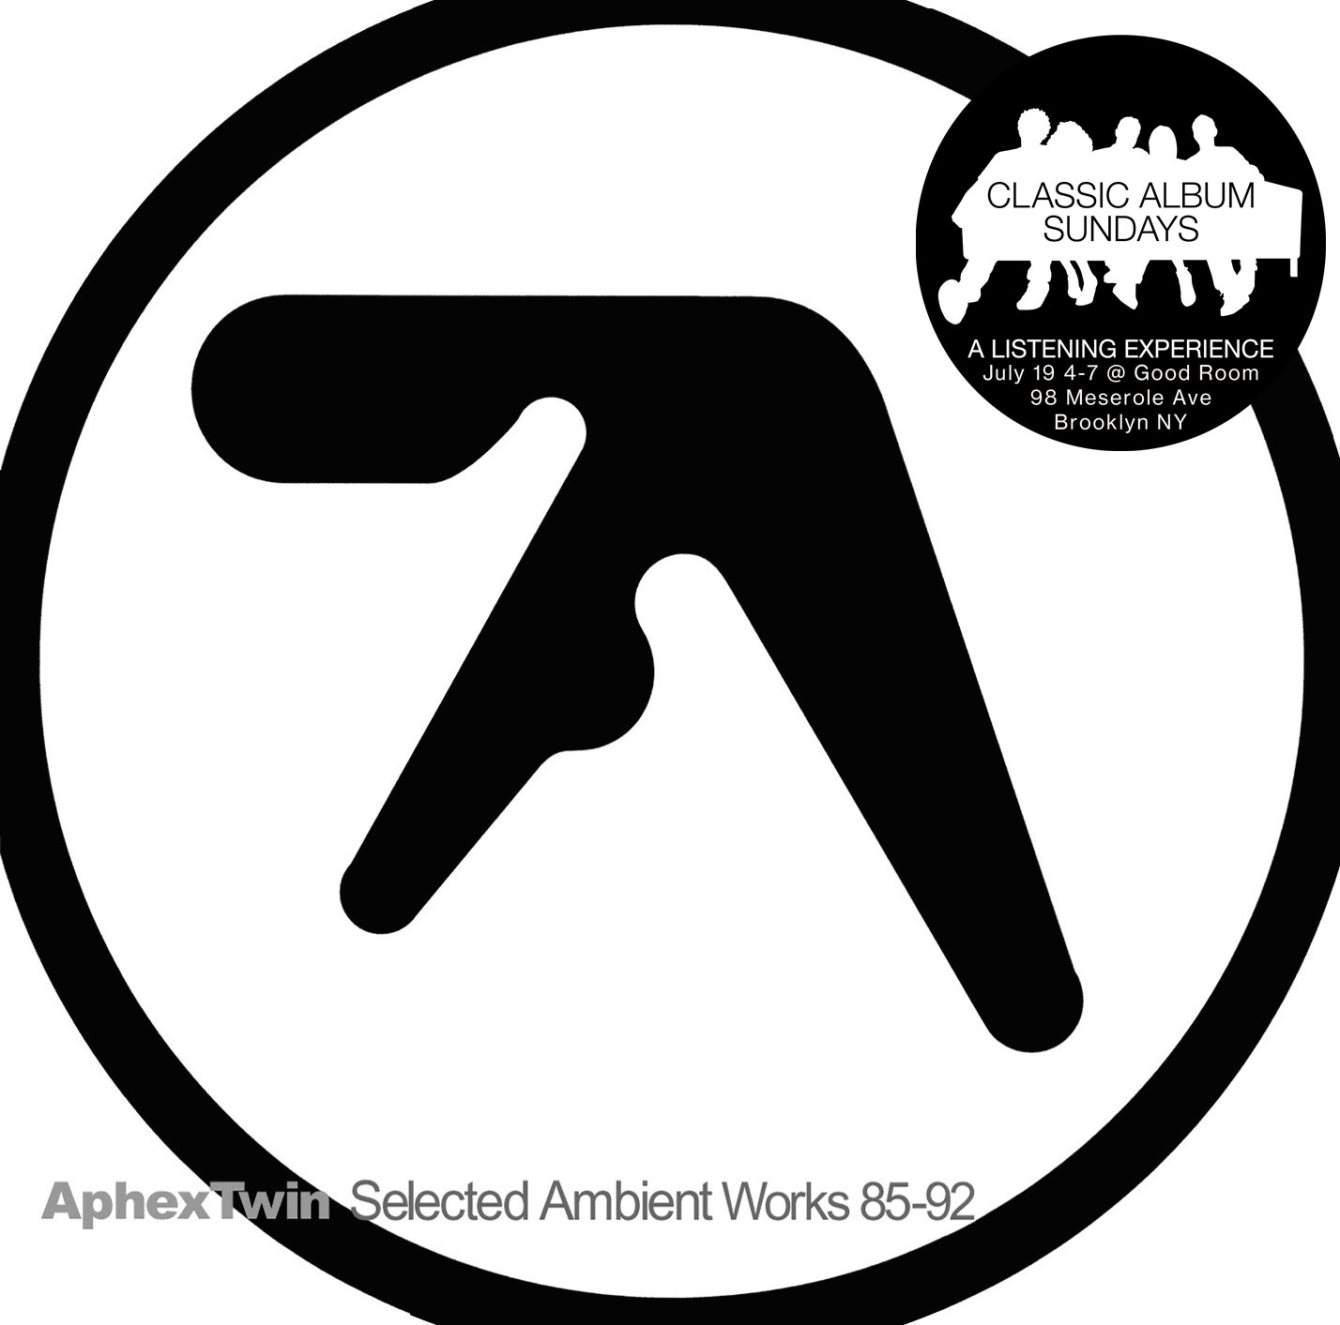 Classic Album Sundays NYC presents Aphex Twin 'Selected Ambient Works 85-92 - Página frontal